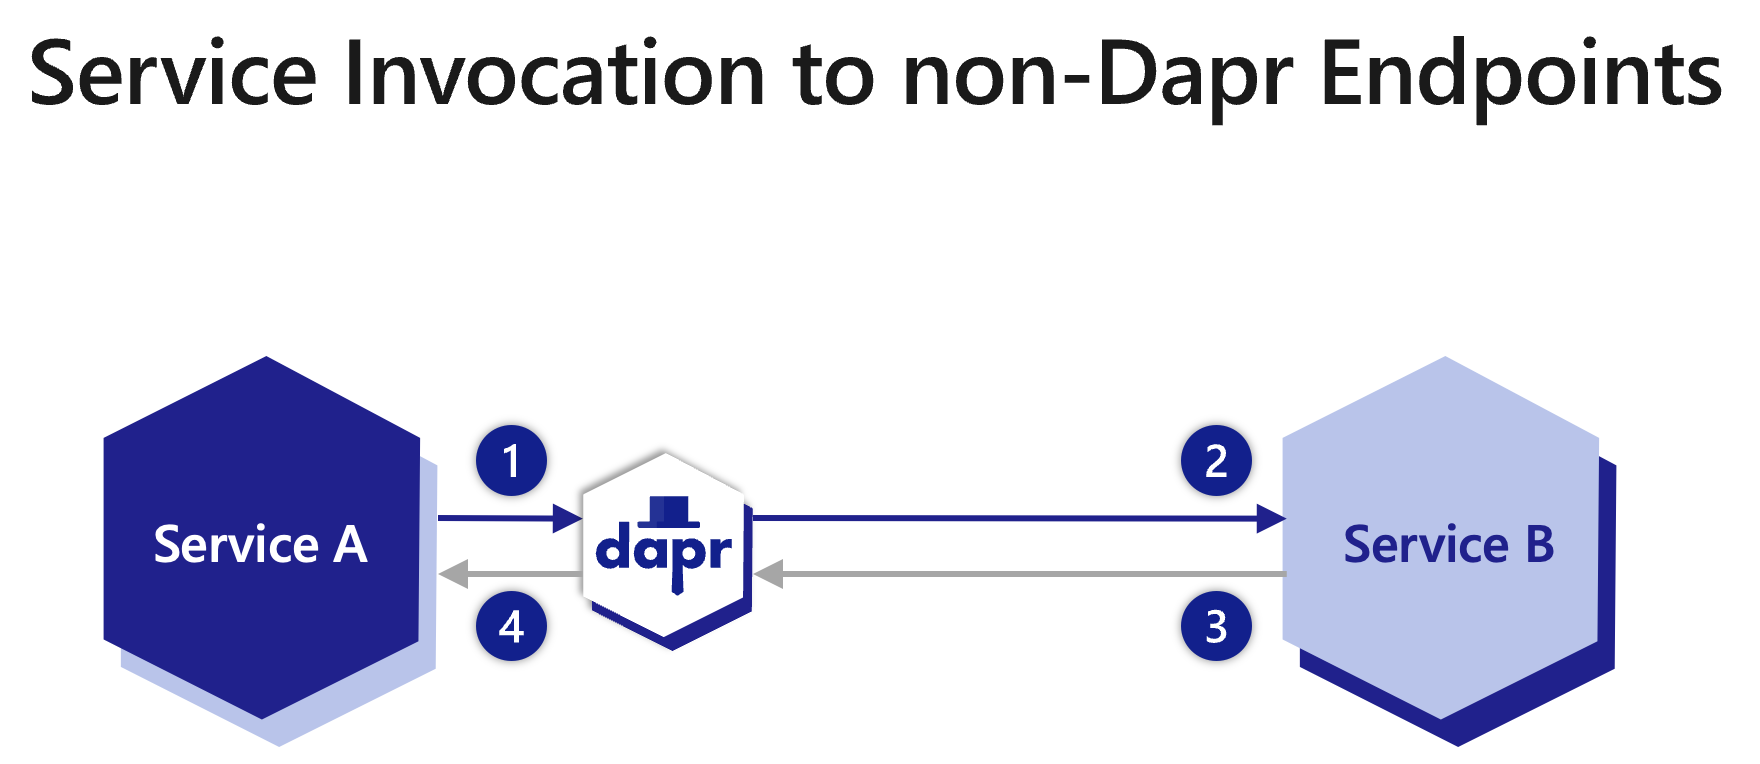 Diagram showing the steps of service invocation to non-Dapr endpoints